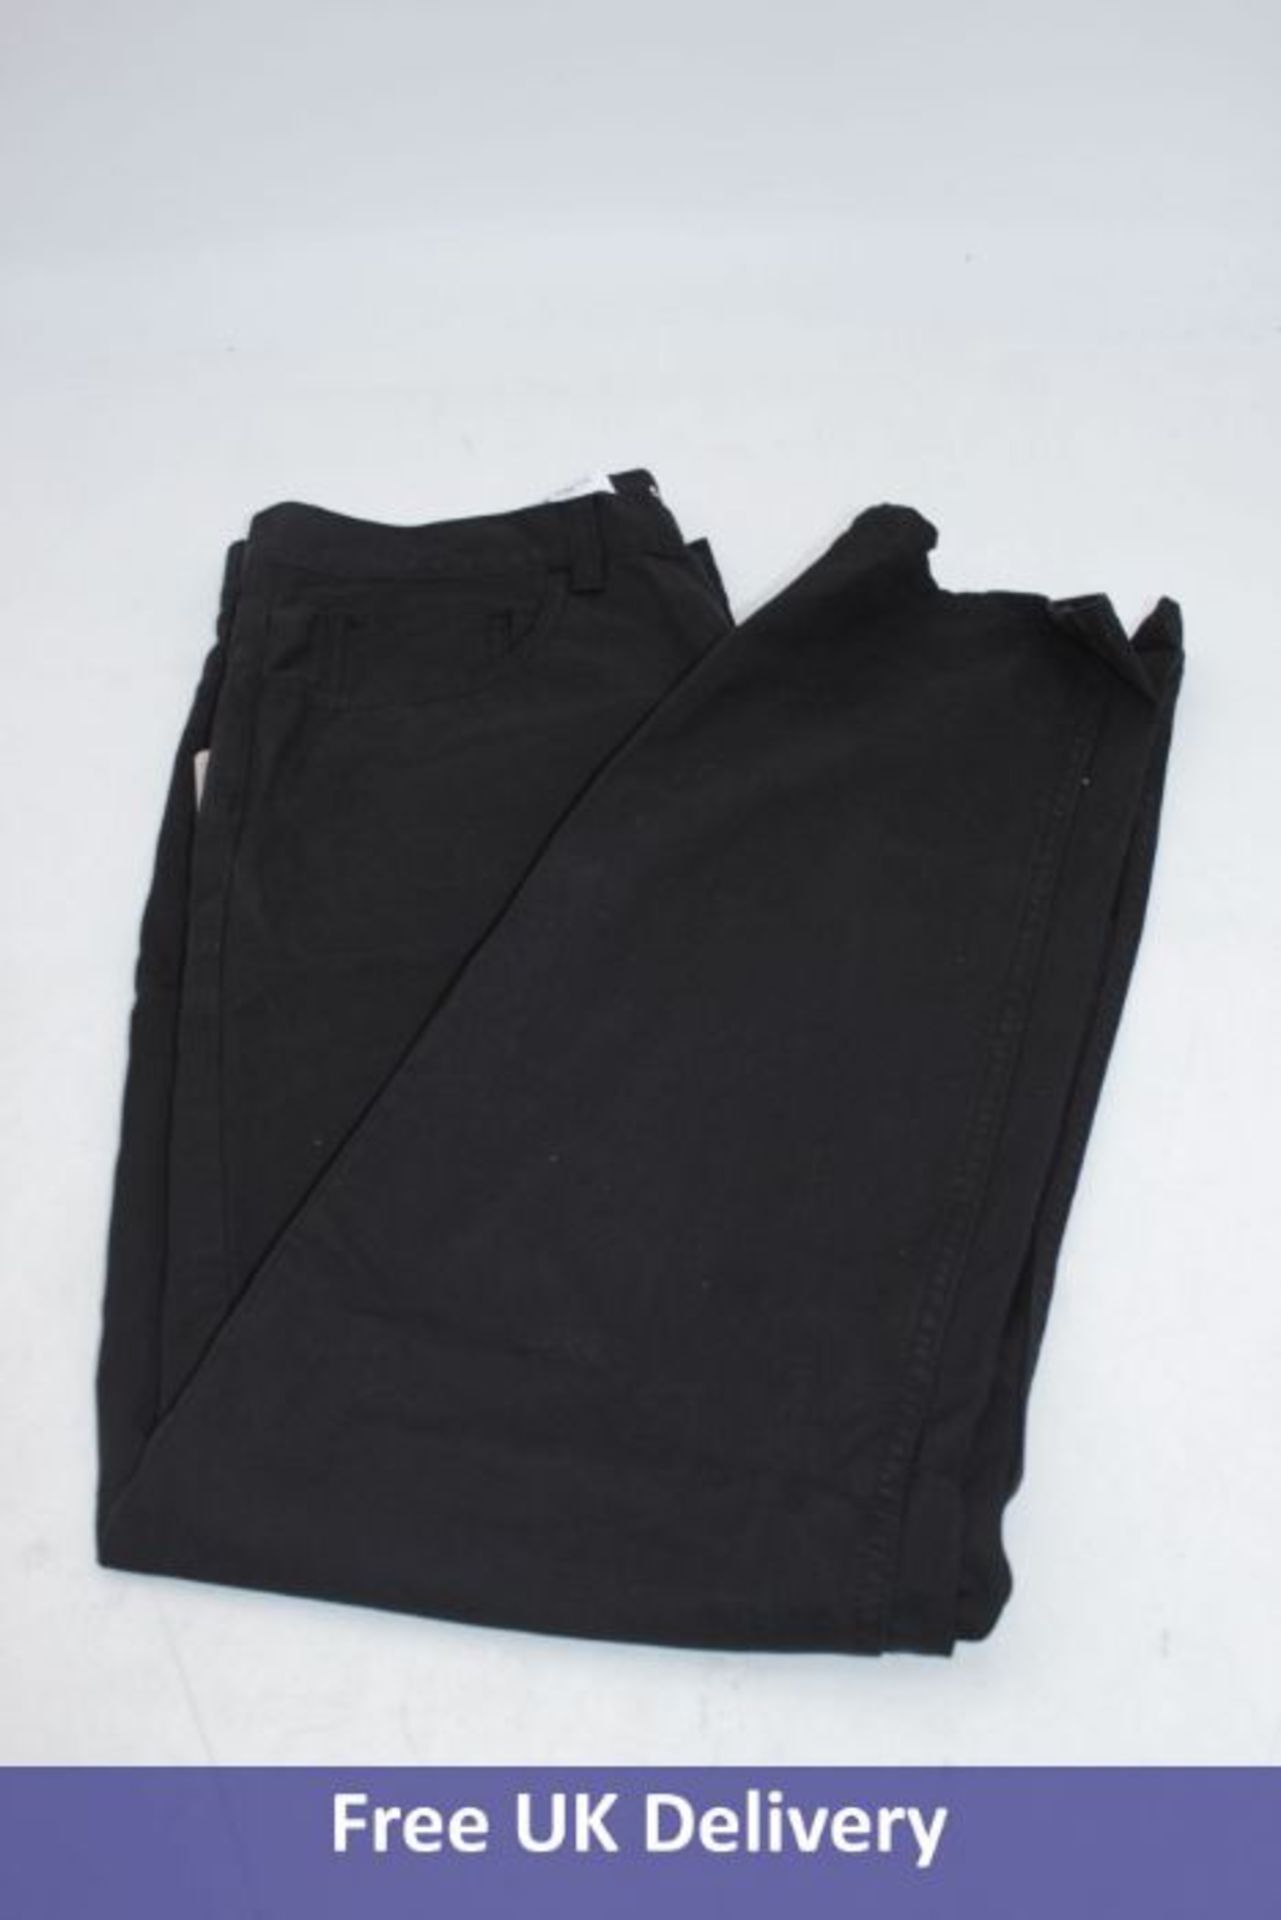 Three items of Carhartt Men's Clothing to include 1x Newel Trousers, Black, Size 32, 1x T-Shirt Akro